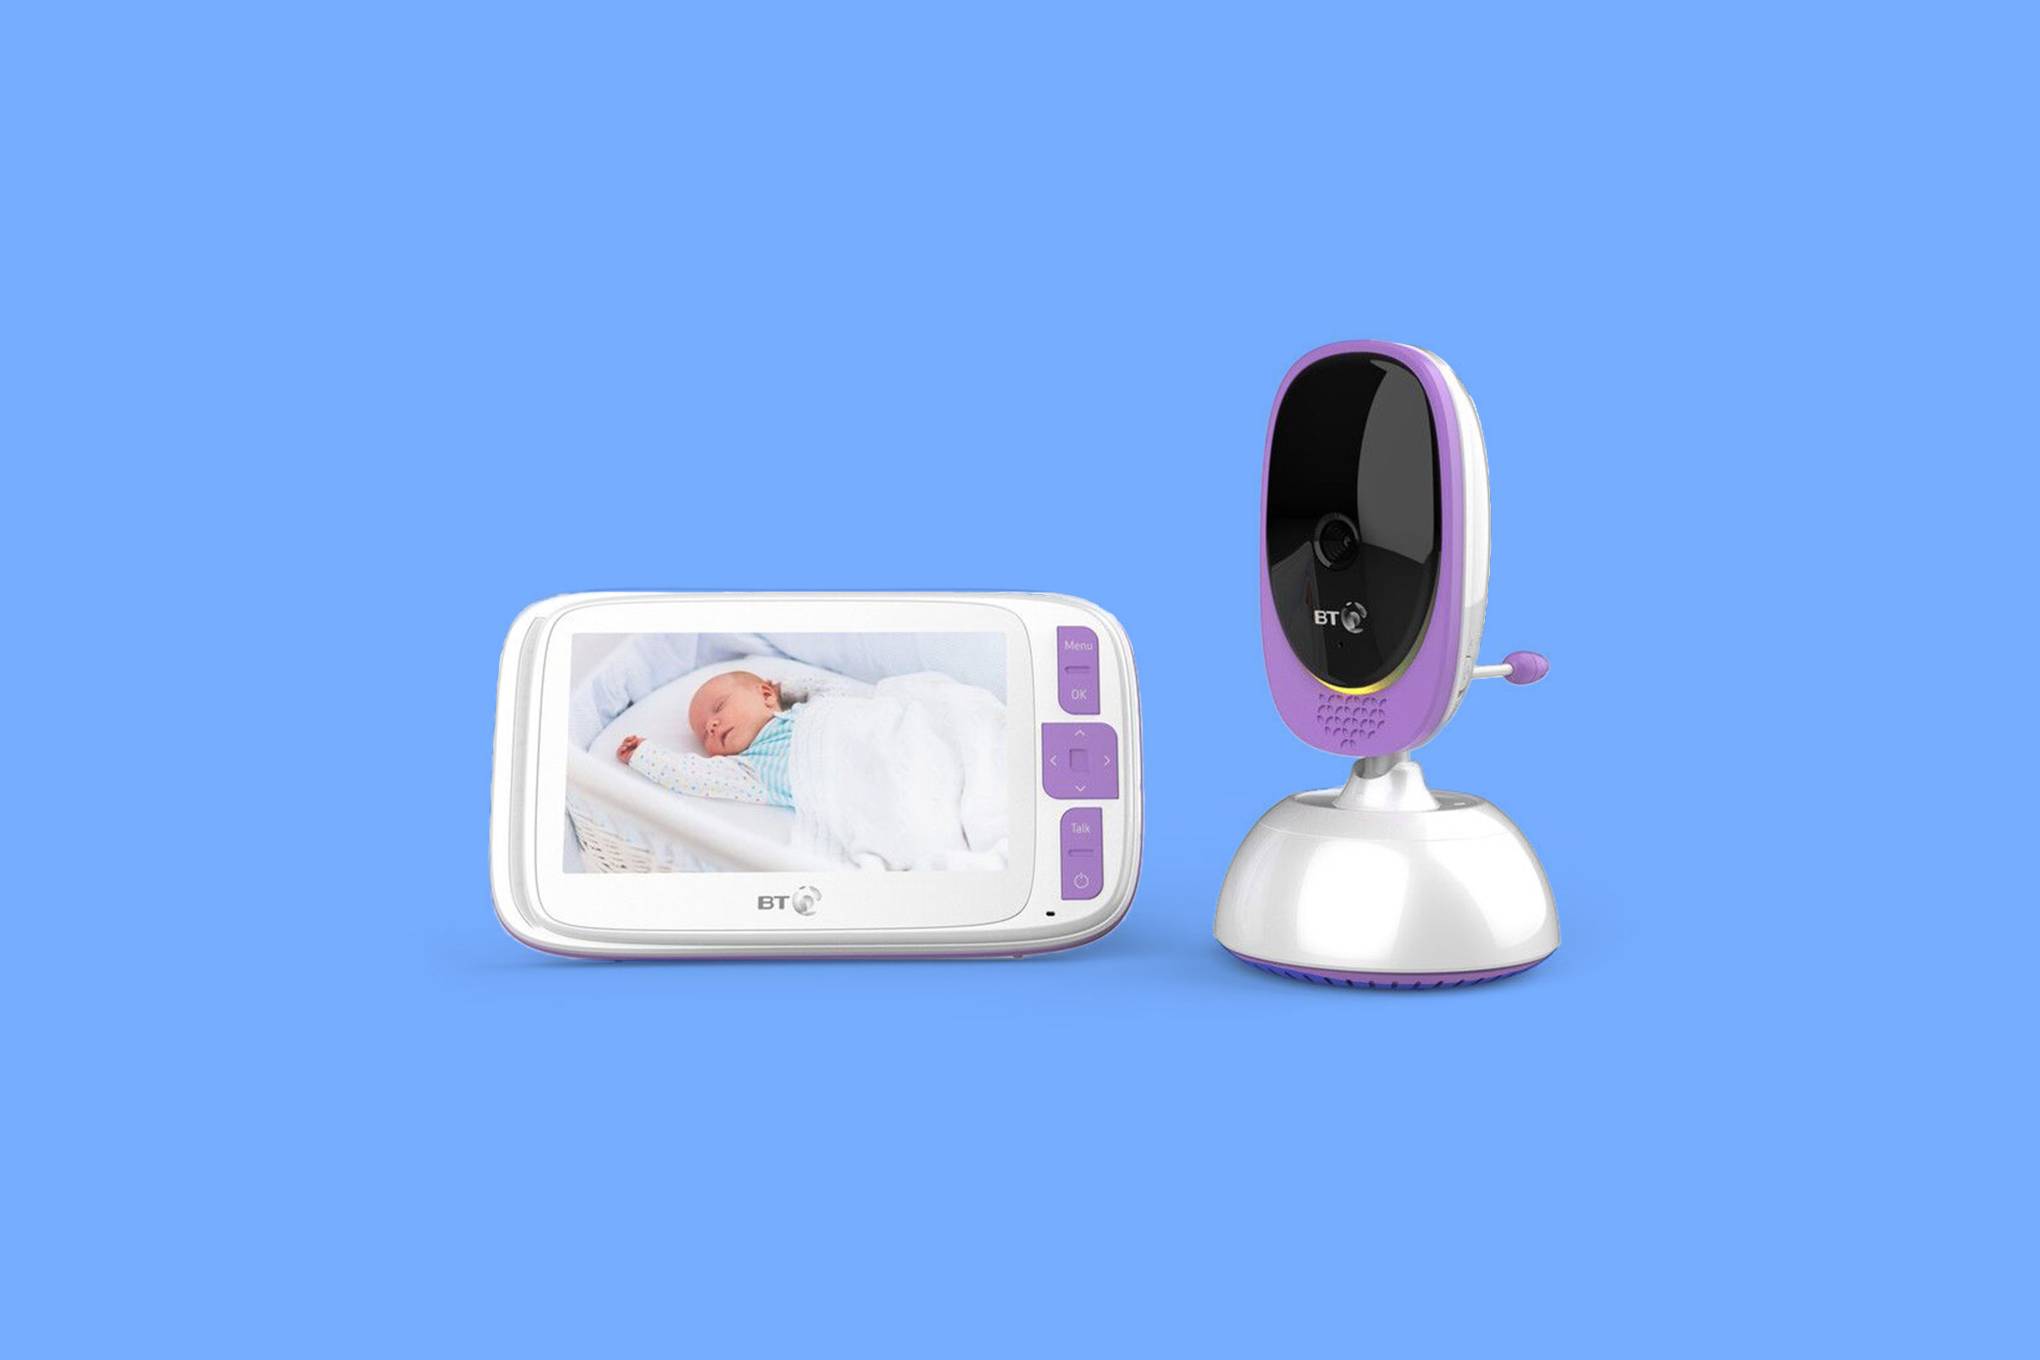 bt baby monitor not linking